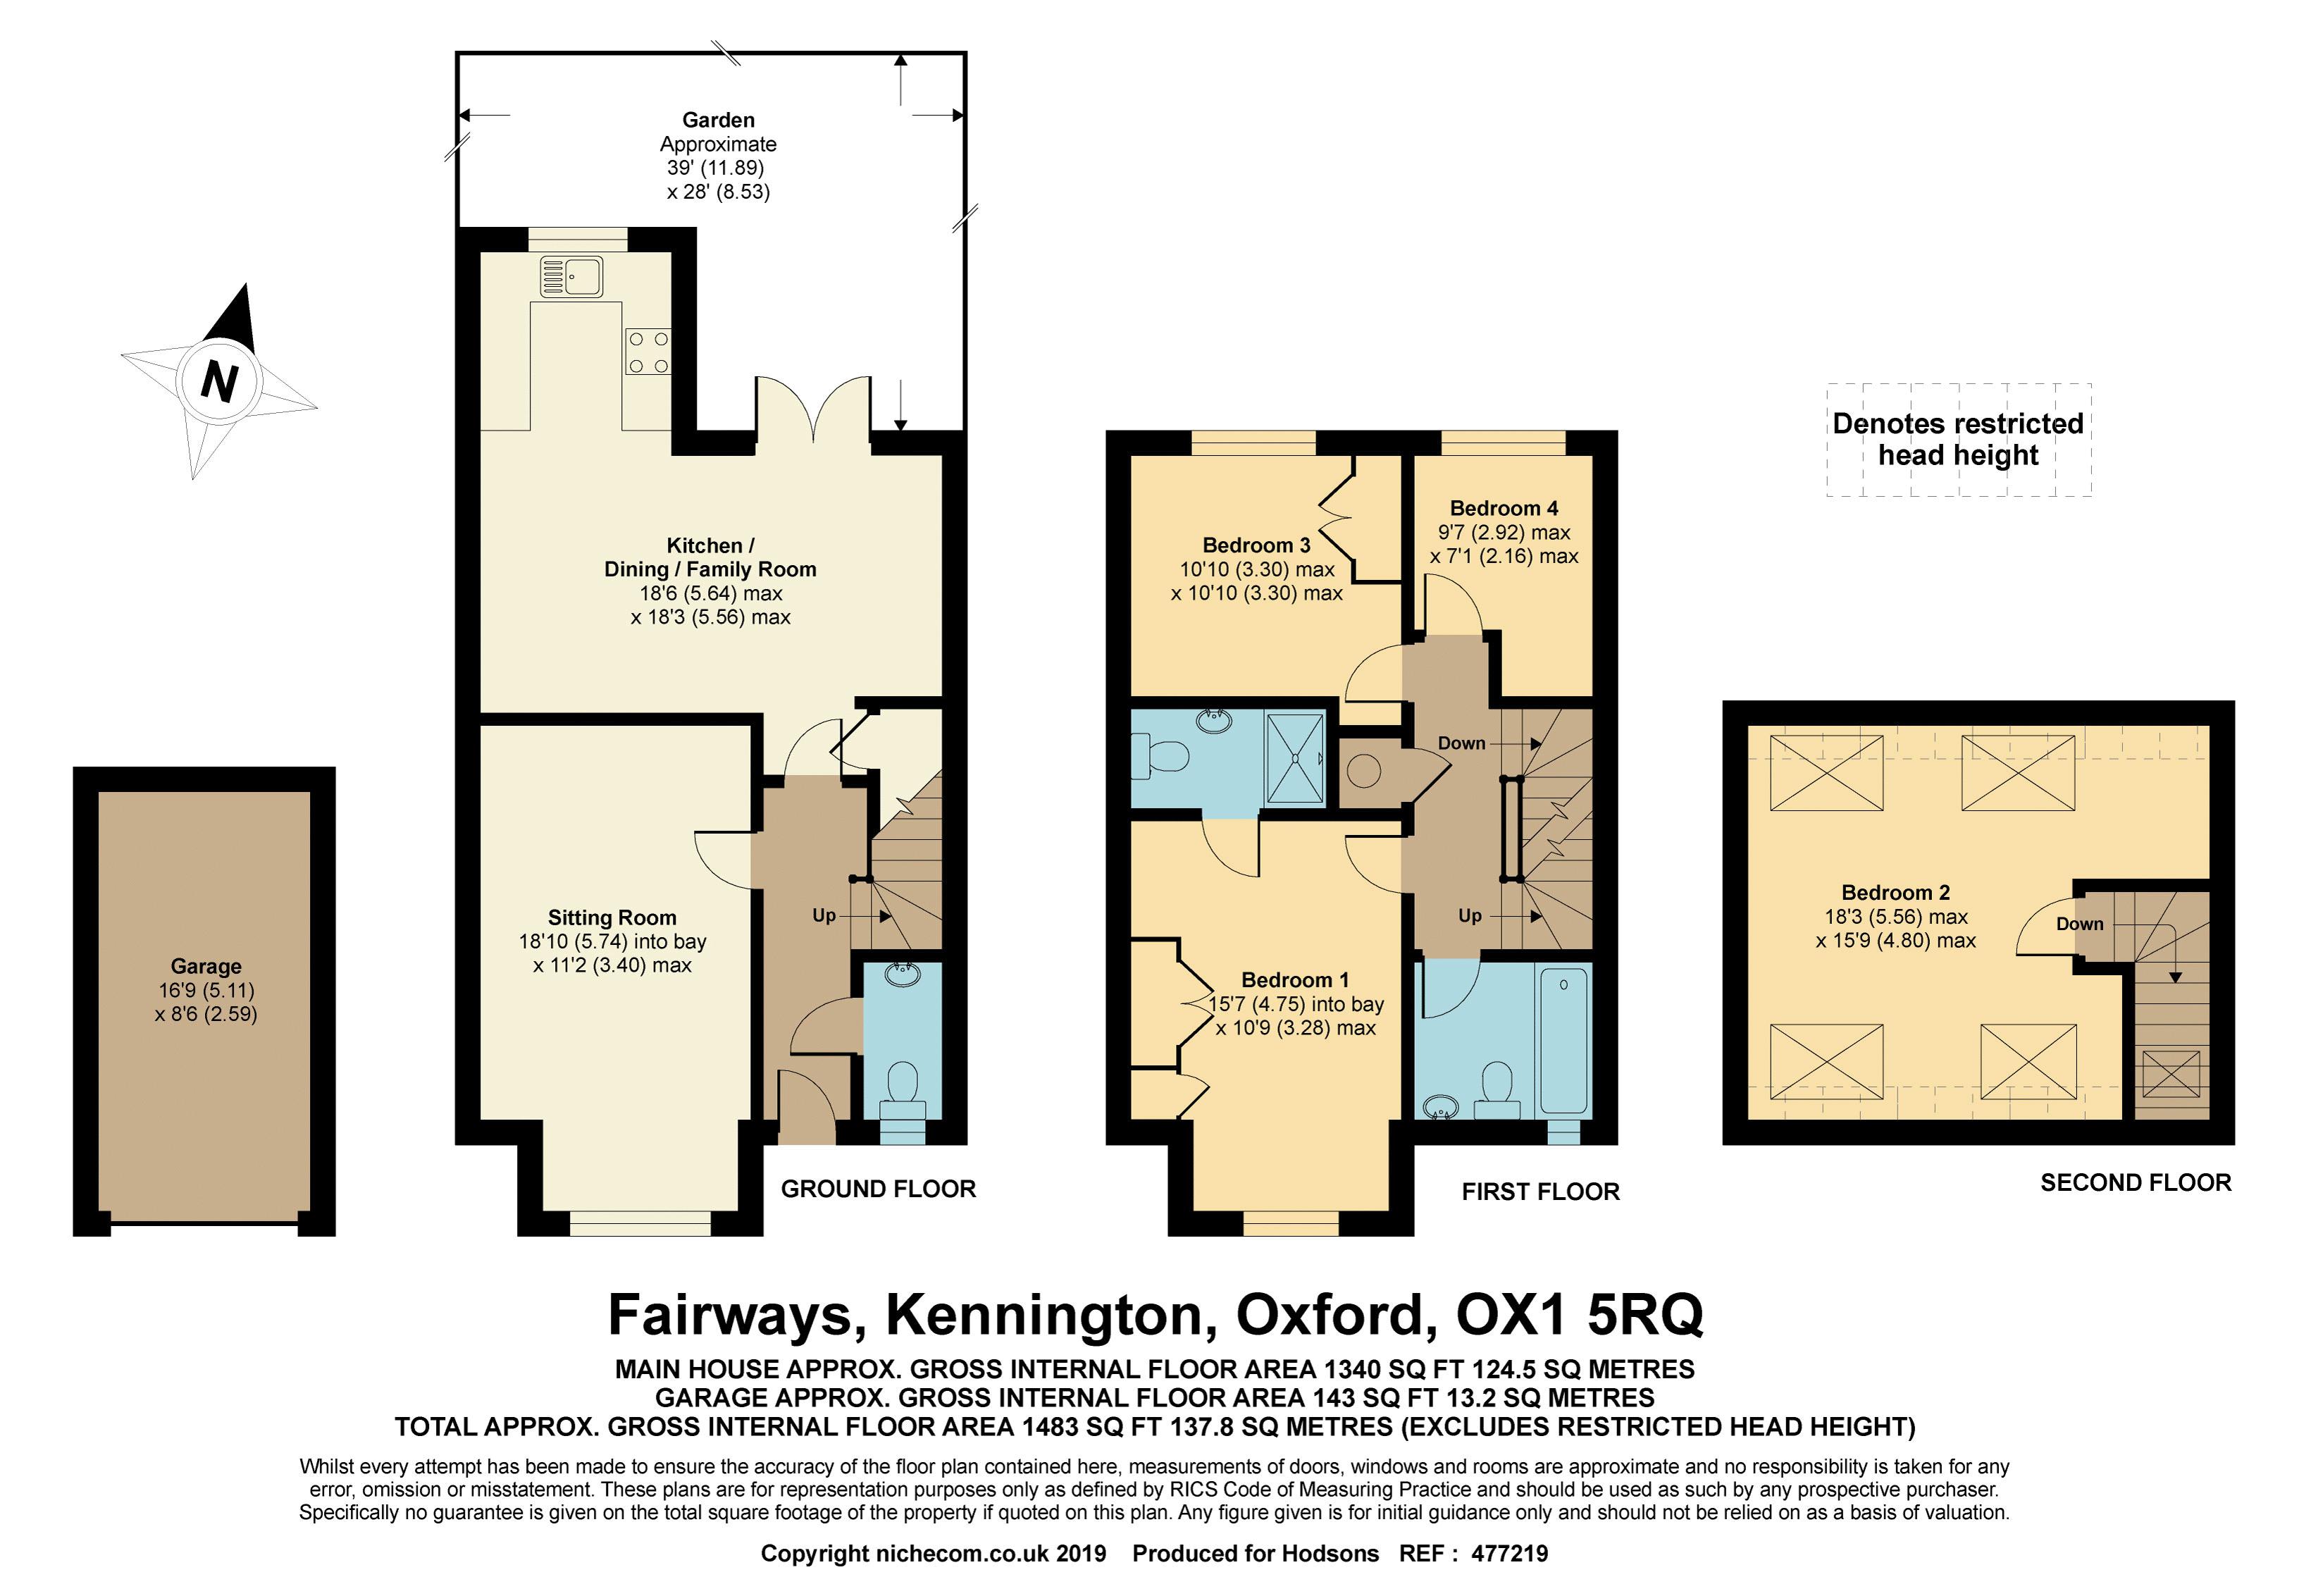 4 Bedrooms Semi-detached house for sale in Fairways, Kennington, Oxford OX1